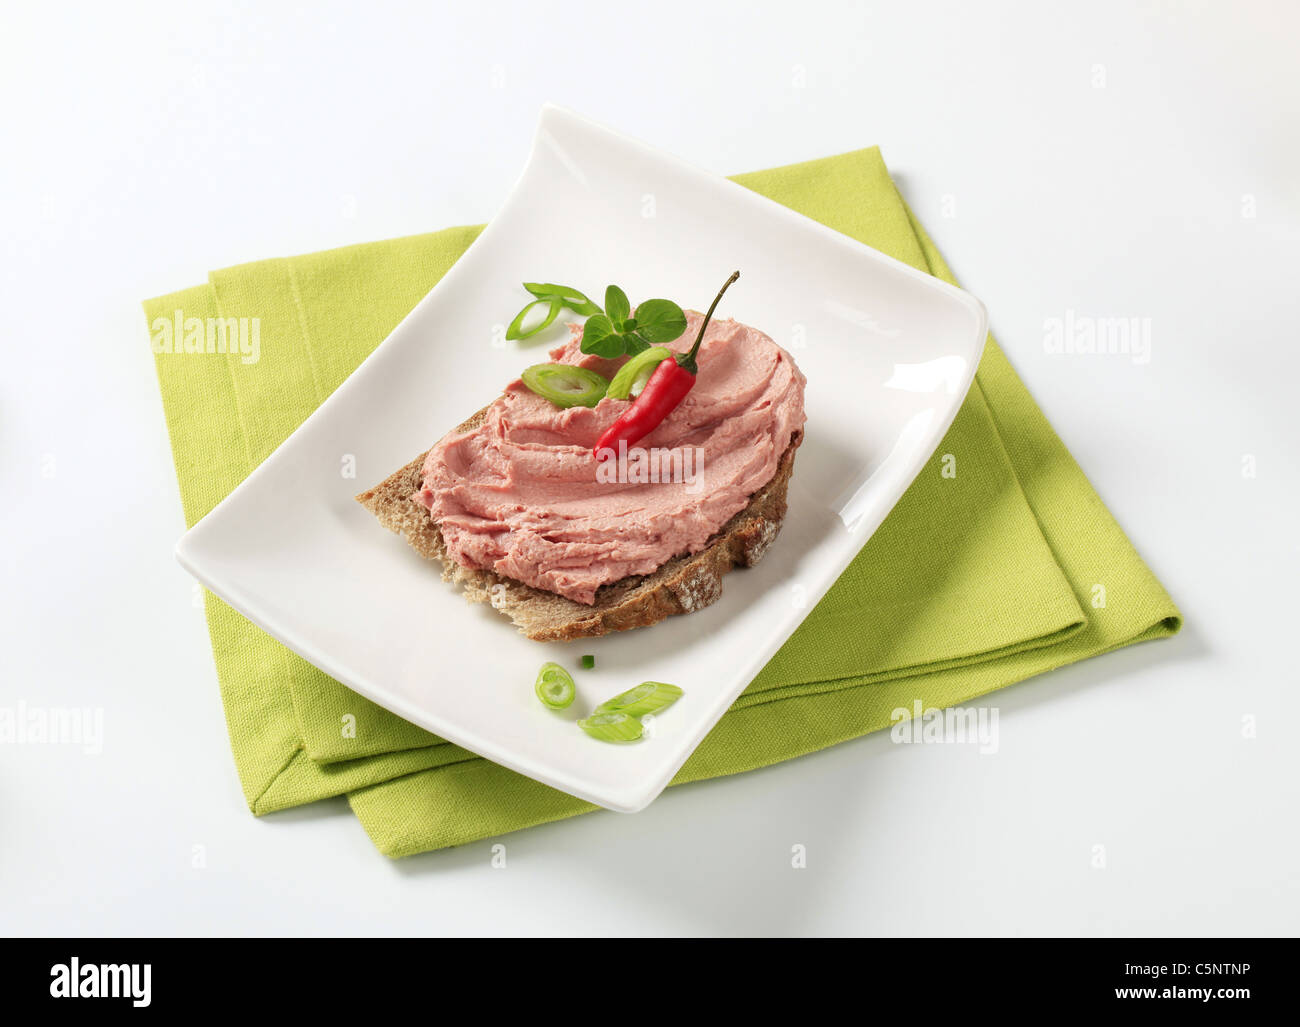 Slice of bread and smooth liver pate Stock Photo